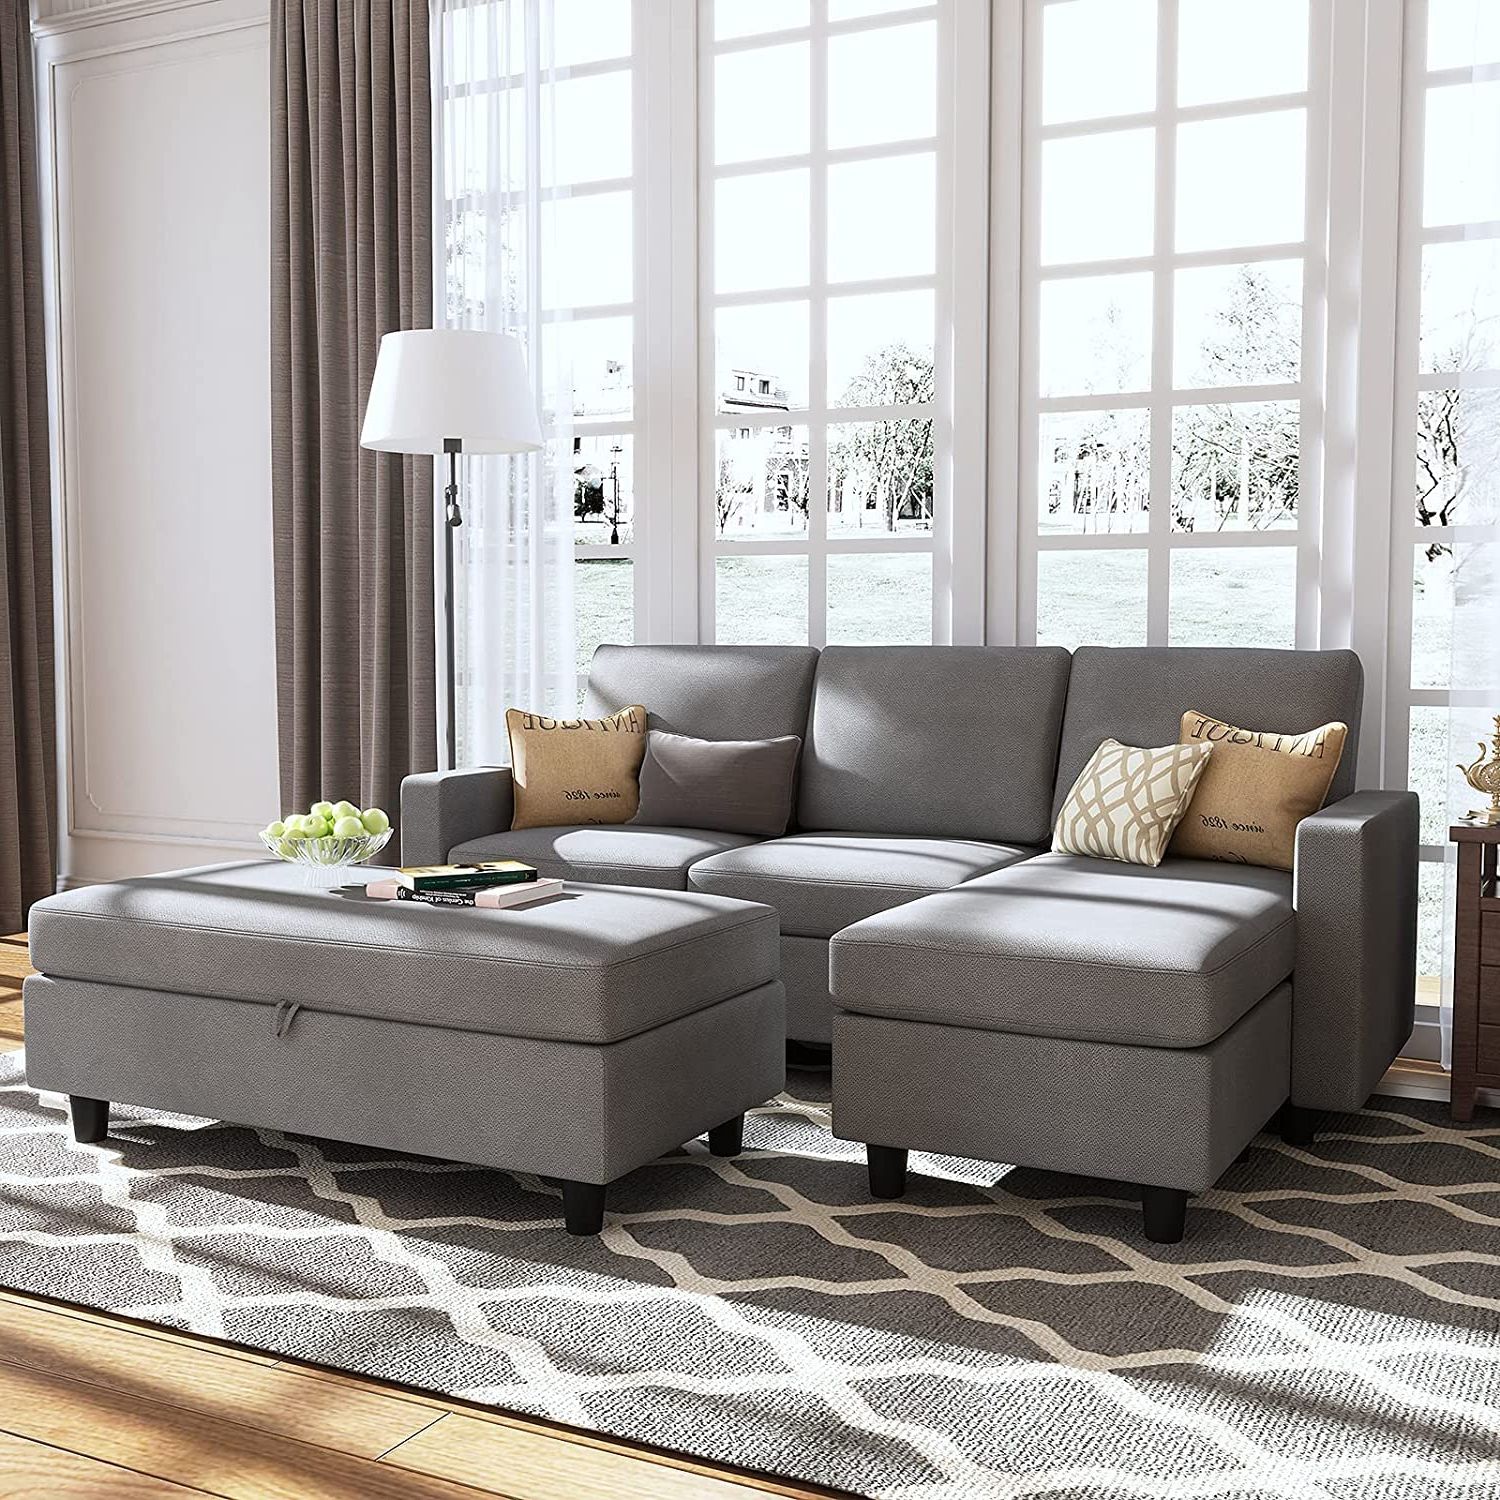 Popular Honbay Grey Sectional Couch With Ottoman, Convertible L Shaped Chaise Inside Convertible L Shaped Sectional Sofas (Photo 12 of 15)